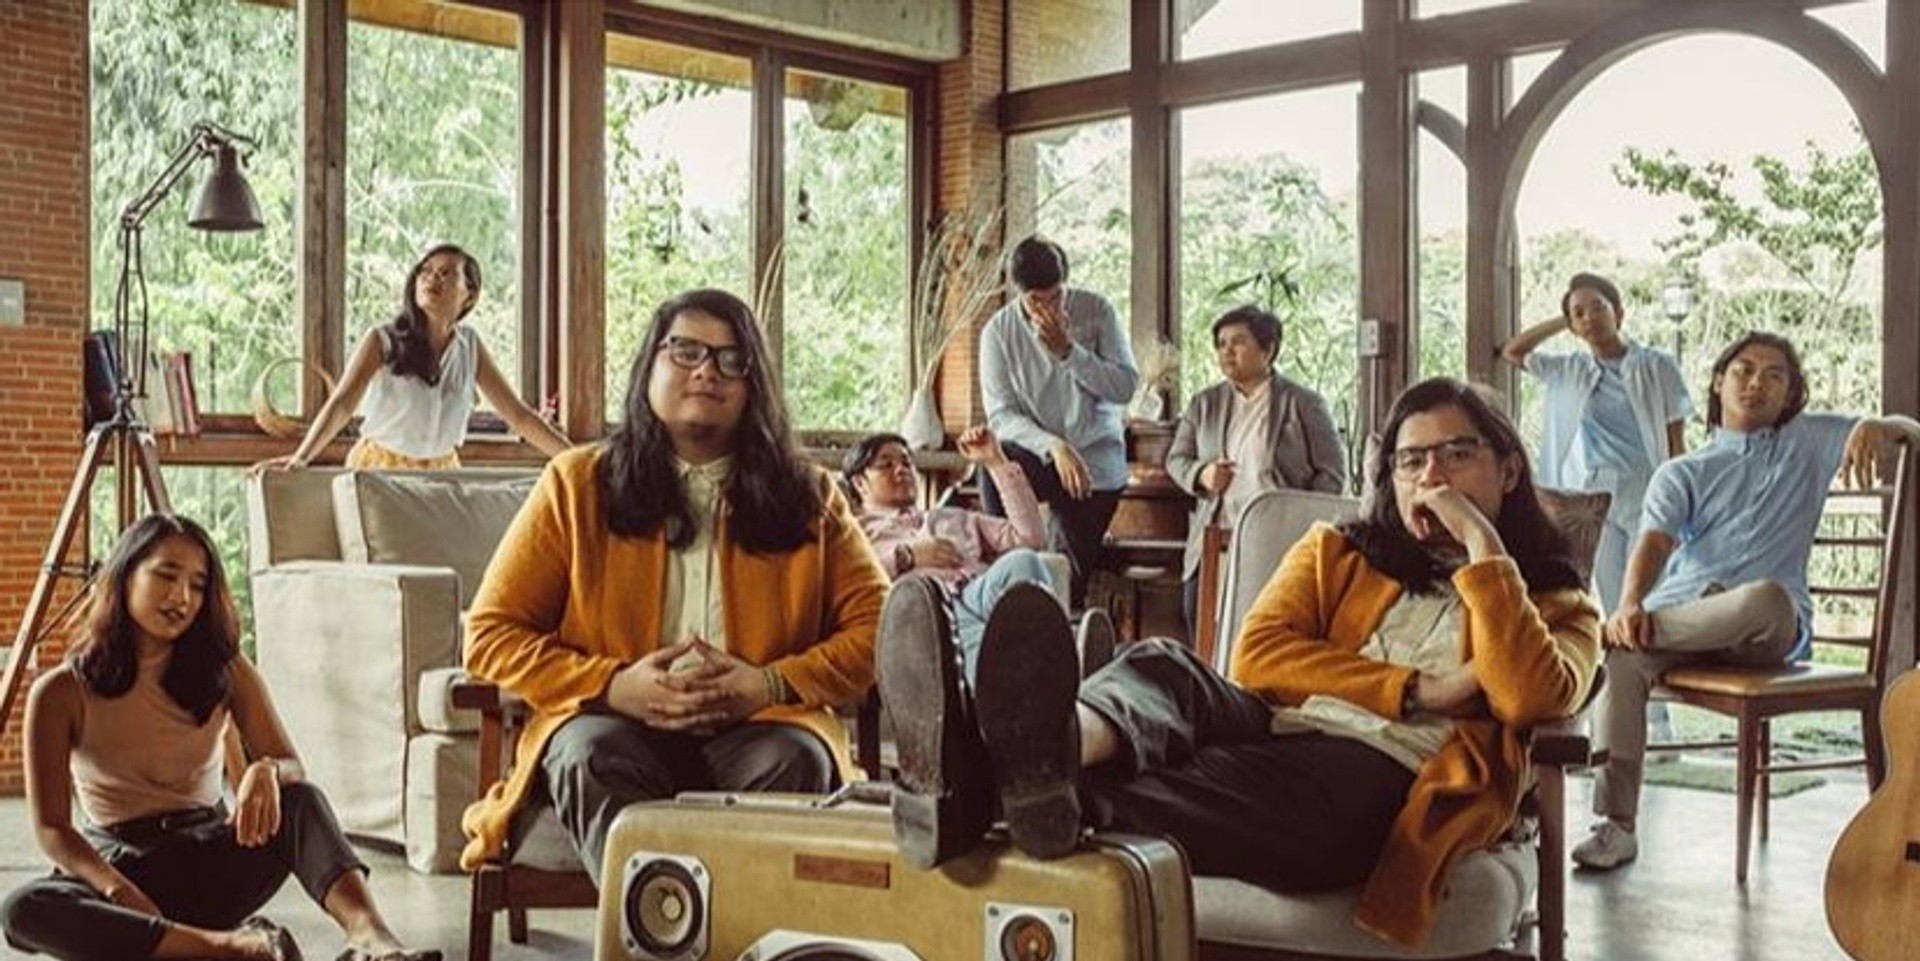 Ben&Ben announce official tracklist, including collaboration with Ebe Dancel